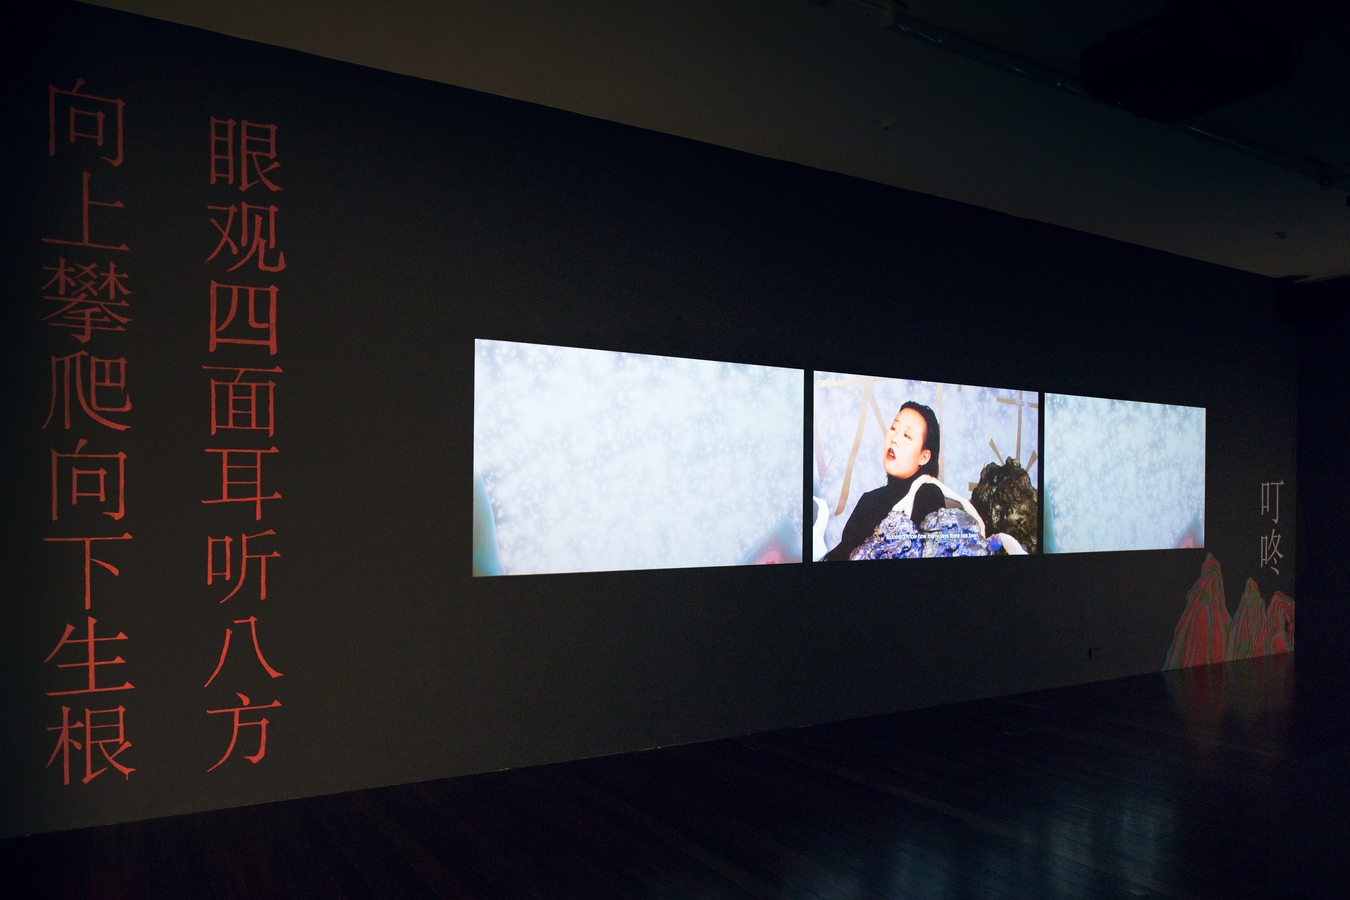 Image: Qianye Lin and Qianhe ‘AL’ Lin, Thus the Blast Carried It, Into the World 它便随着爆破, 冲向了世界 (installation view), 2021. Photo: Janneth Gil.